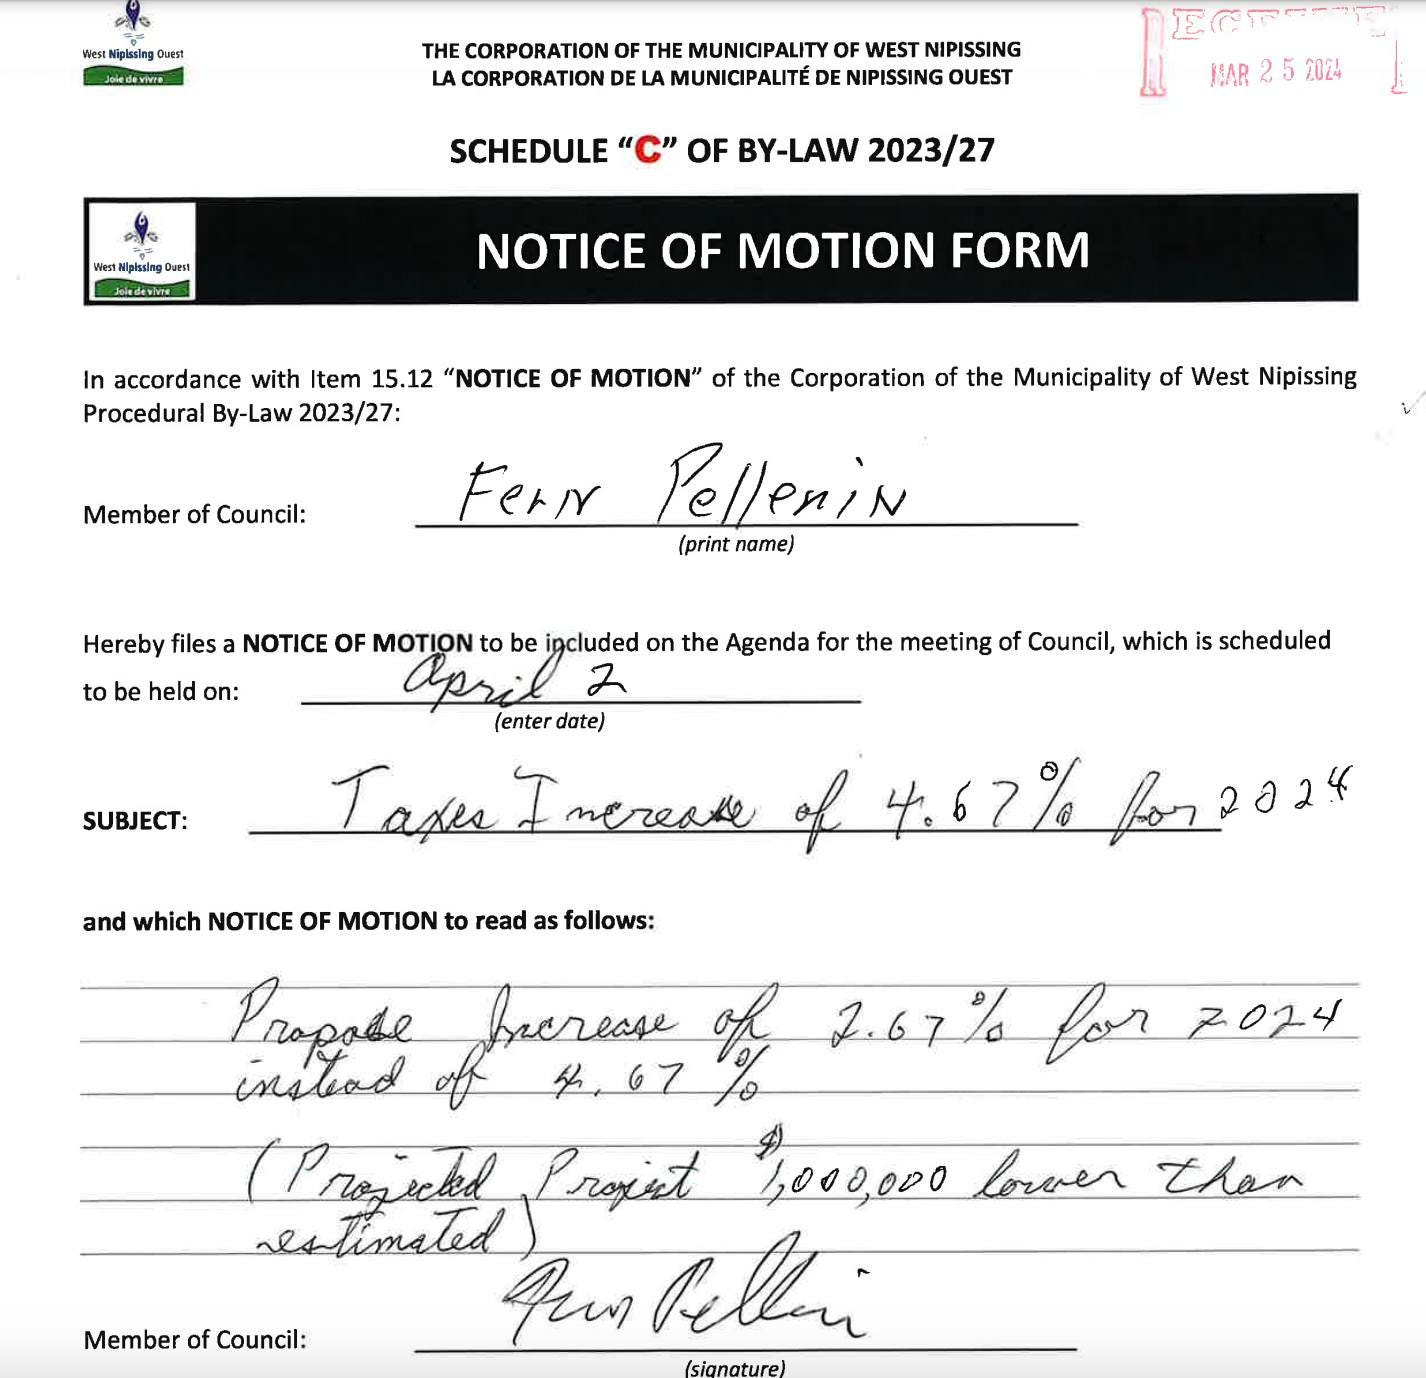 May be an image of ticket stub and text that says '. CORPORATION OF HE MUNICIPALIT LA CORPORATION MUNICIPALITÉ OFWEST NIPISSING NIPISSING QUEST .u SCHEDULE "C" OF BY-LAW 2023/27 MAR NOTICE OF MOTION FORM In accordance with Item 15.12 "NOTICE OF MOTION" Procedural By-Law 2023/27: Member Council: the Corporation of the Municipality of West Nipissing Hereby Fenr Pellenin (print name) NOTICE OF to held on: be included on the Agenda for the meeting み (enterdate) date) SUBJECT: Council, which scheduled Laxes meresk and which NOTICE OF MOTION to read as follows: Pnopase pbreress fo of 2.677 for 2024 insbod (Pnopebl Lroint 2000,000 Lover than nestimated Pu bellai Member of Council:'